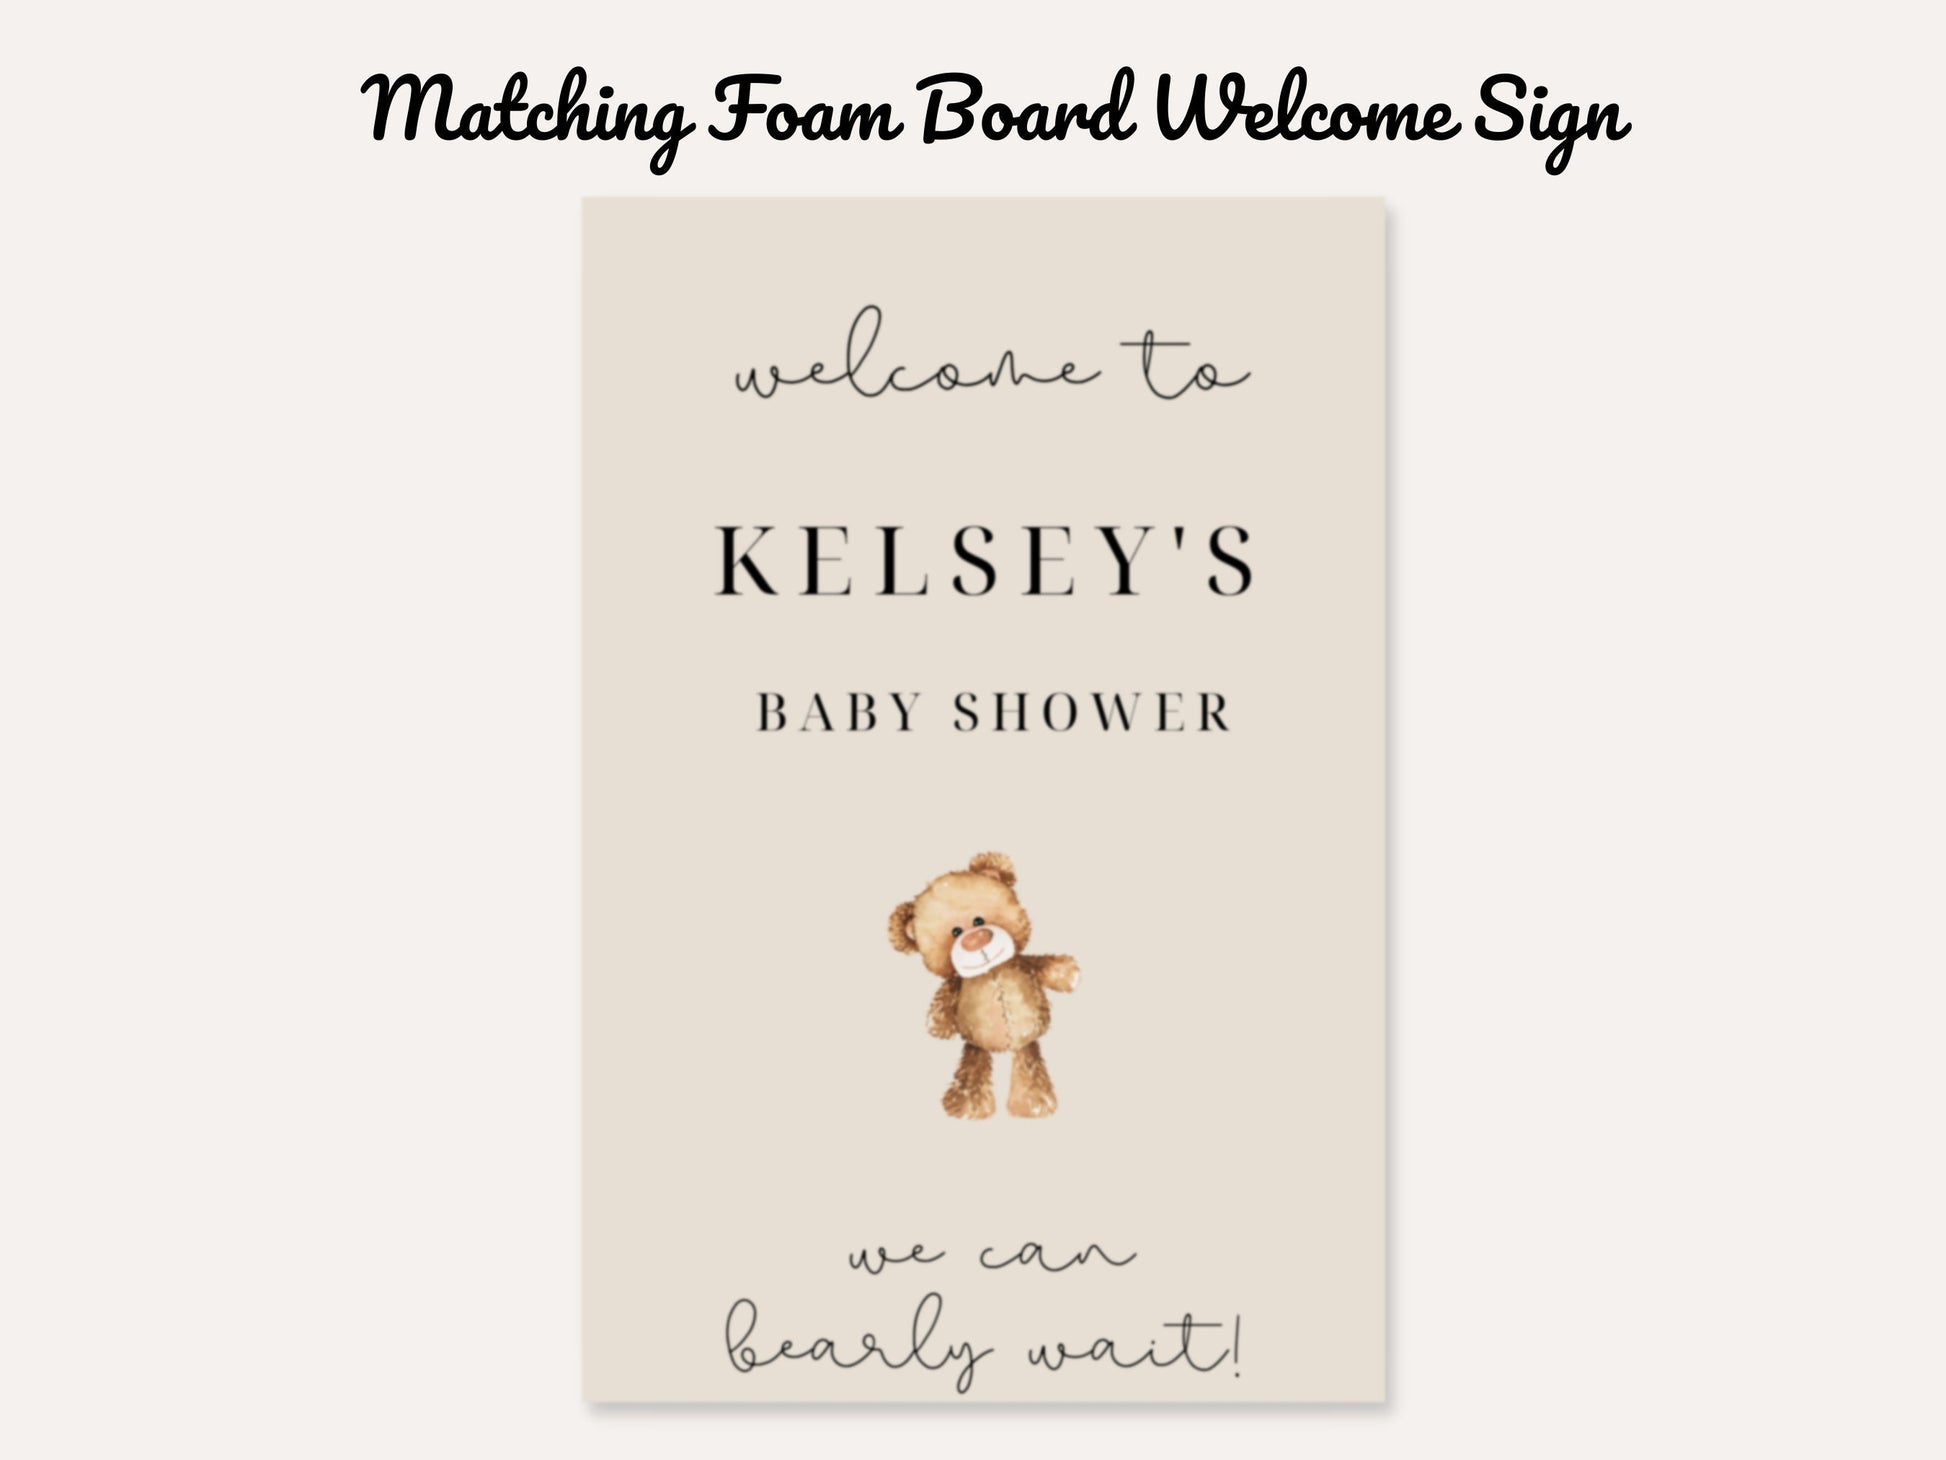 Baby shower Welcome Sign We can bearly Wait Teddy Bear Baby -  Portugal